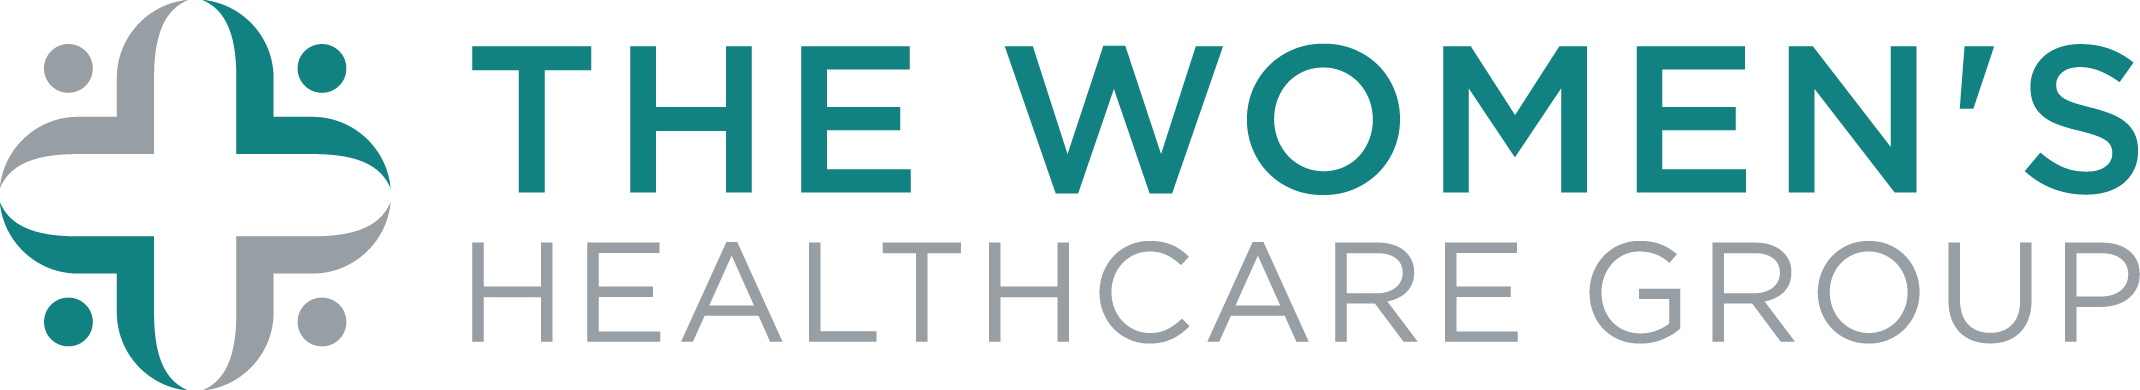 The Women's Healthcare Group